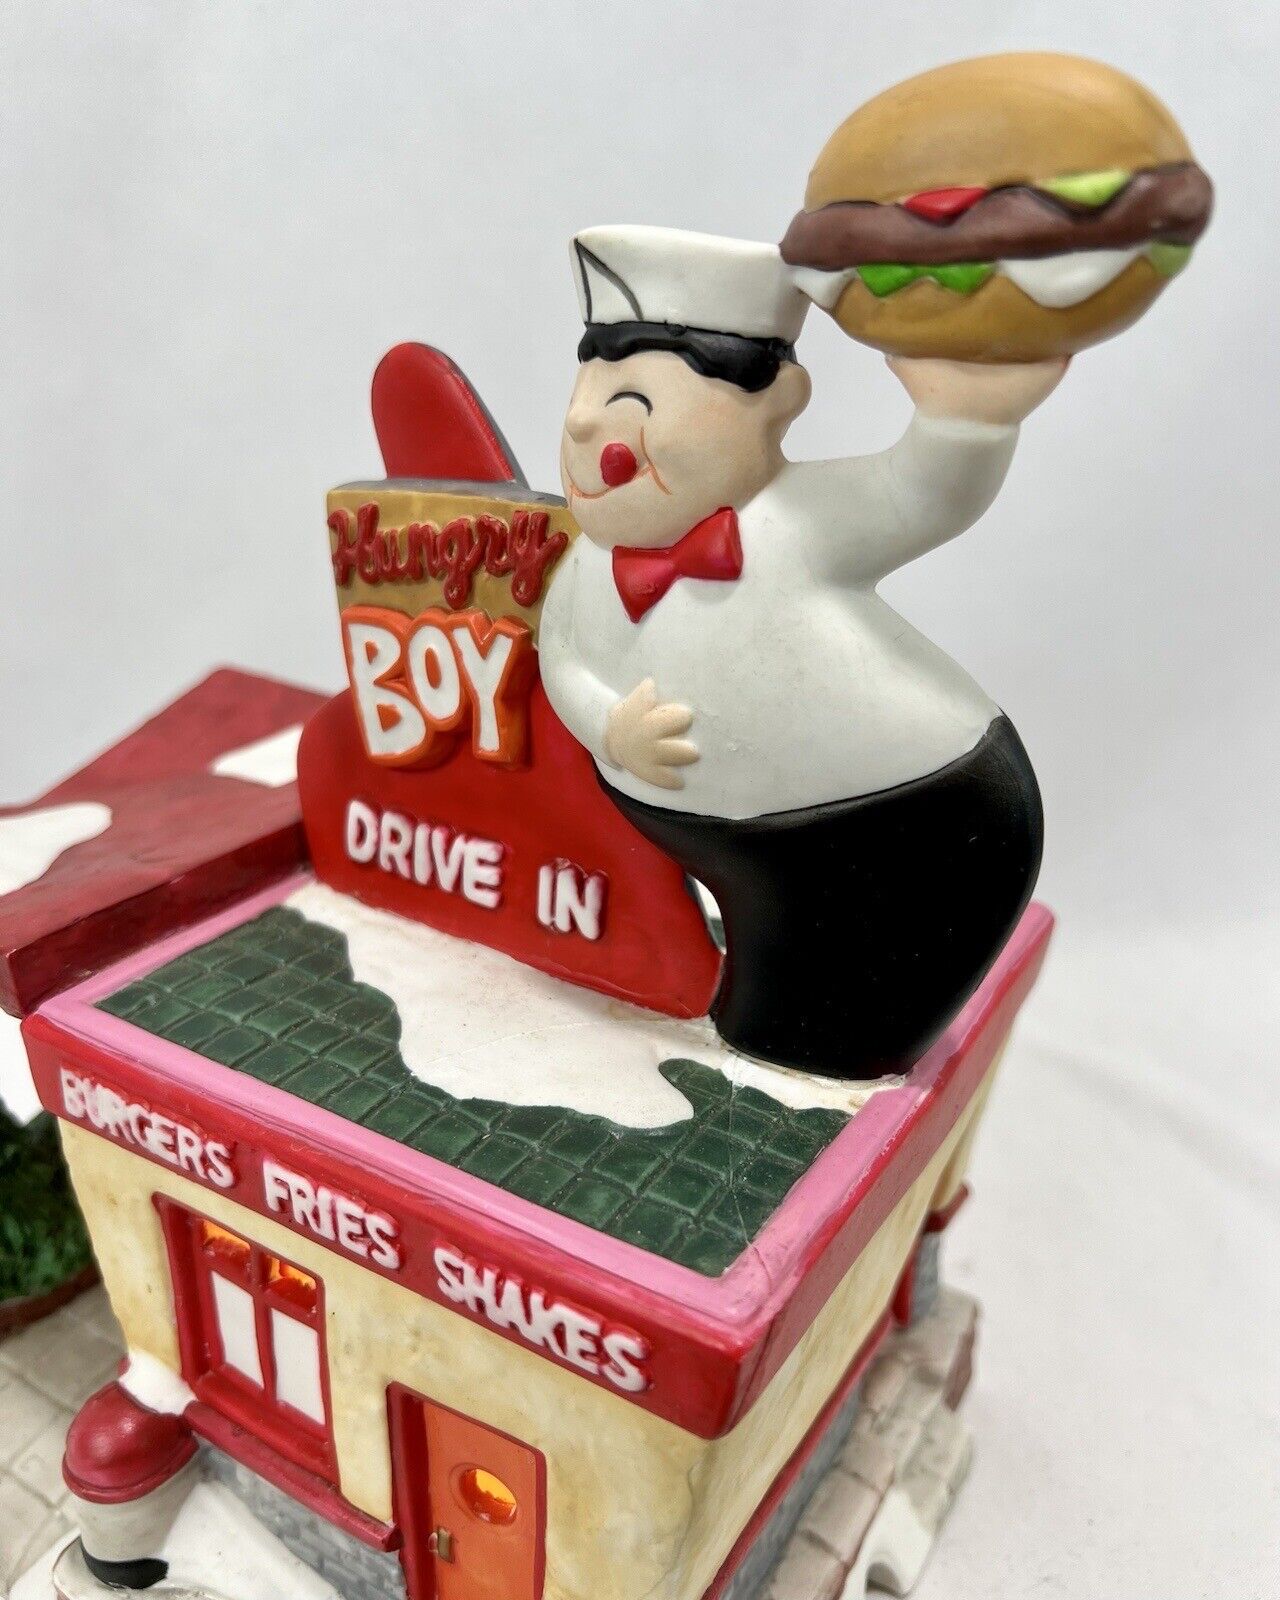 Hungry Boy Drive In Big Burger Fries Shakes Christmas Snow Village Restaurant